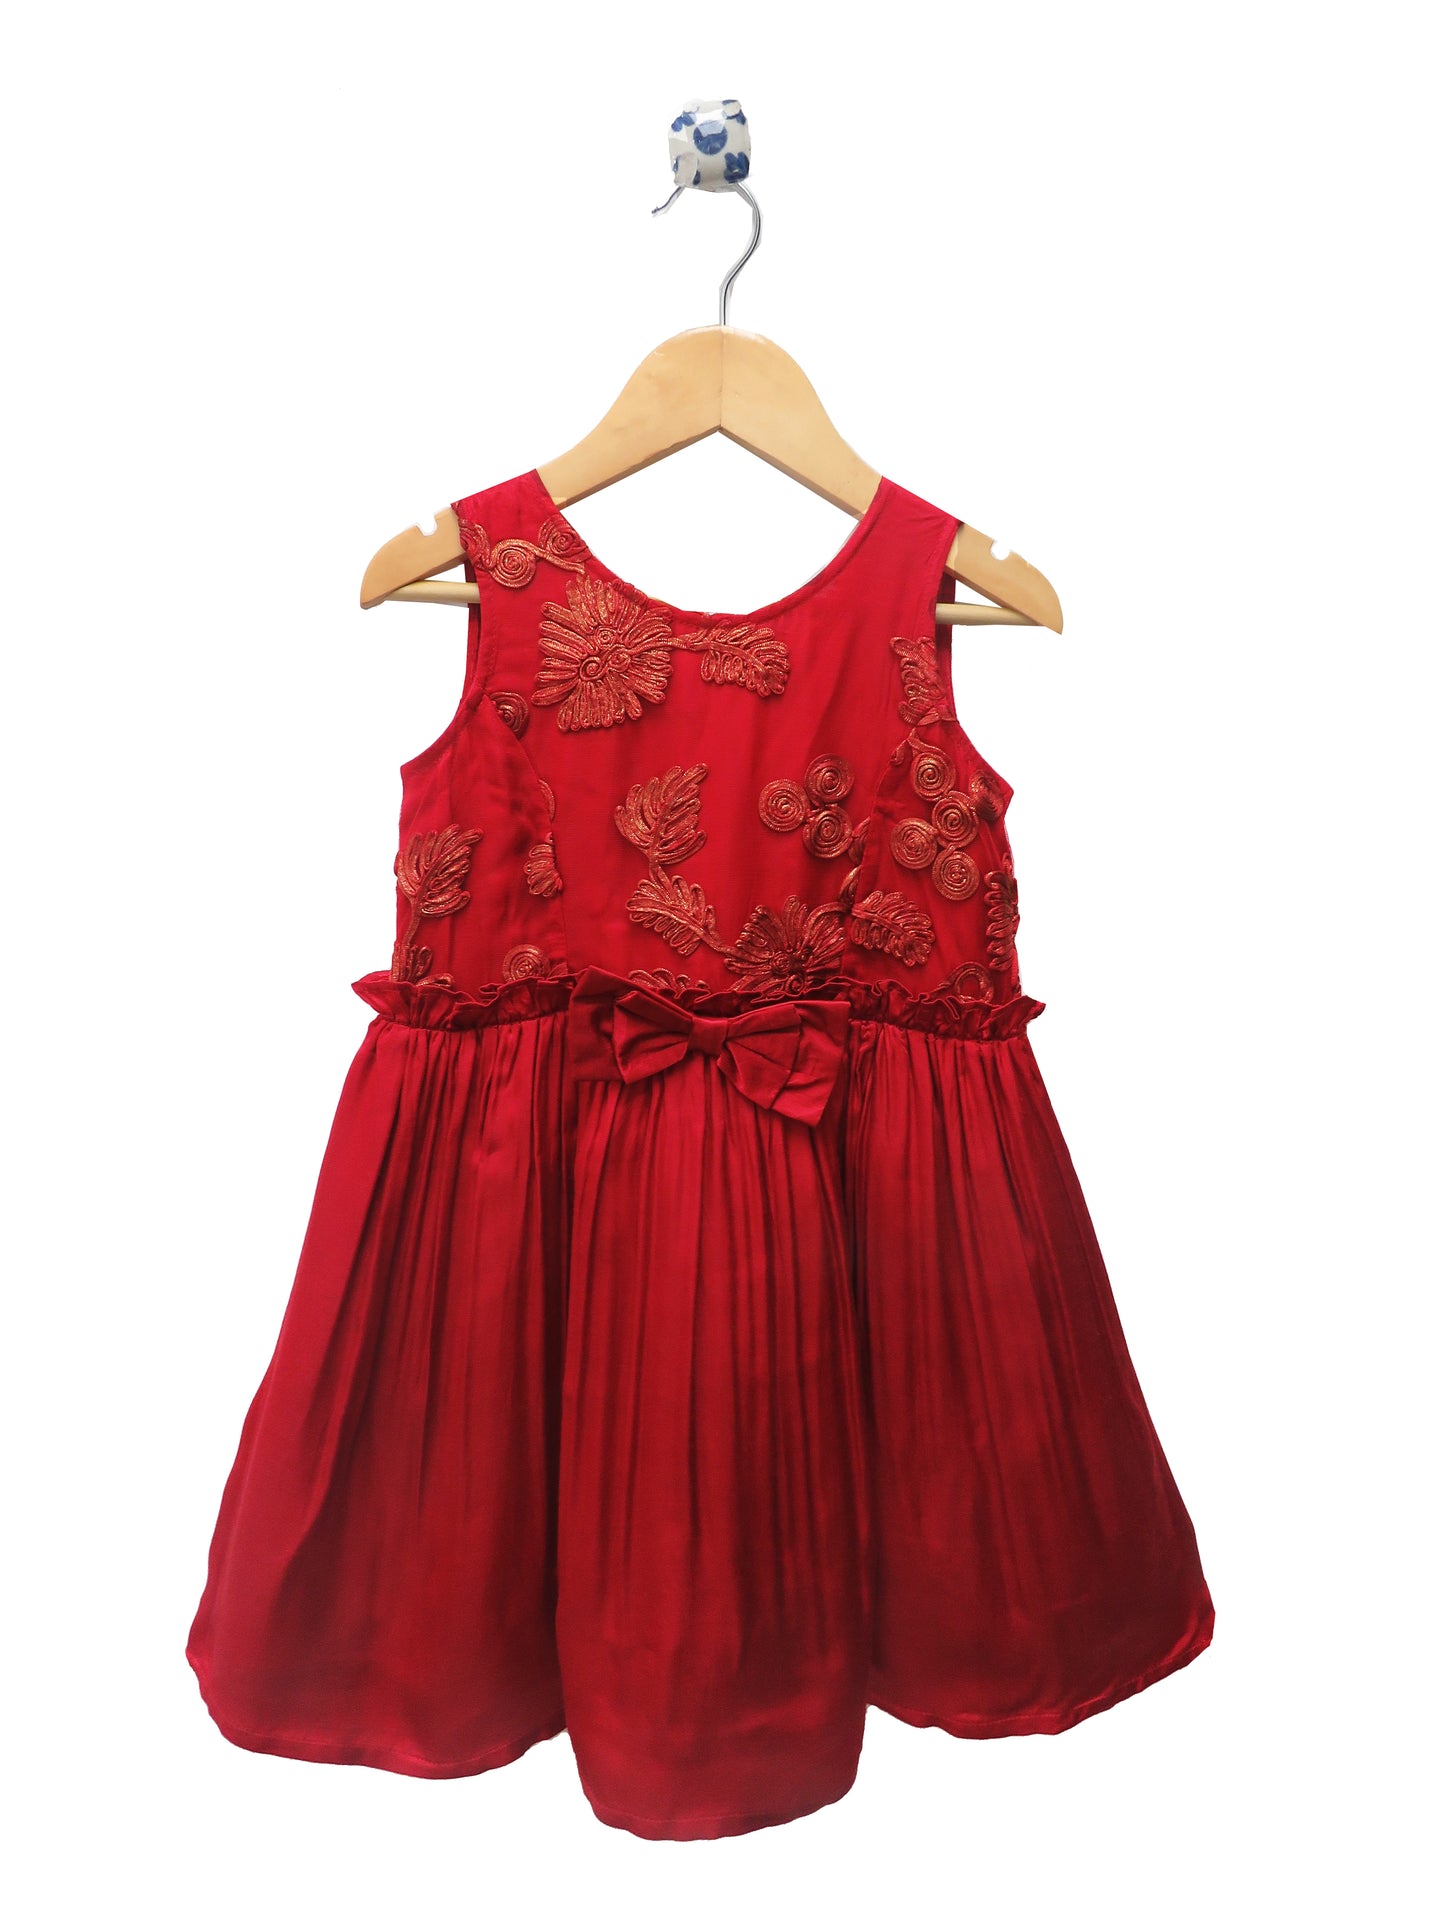 MAROON FESTIVE DRESS IN A BEAUTIFUL EMBELLISHED FABRIC AND BOW